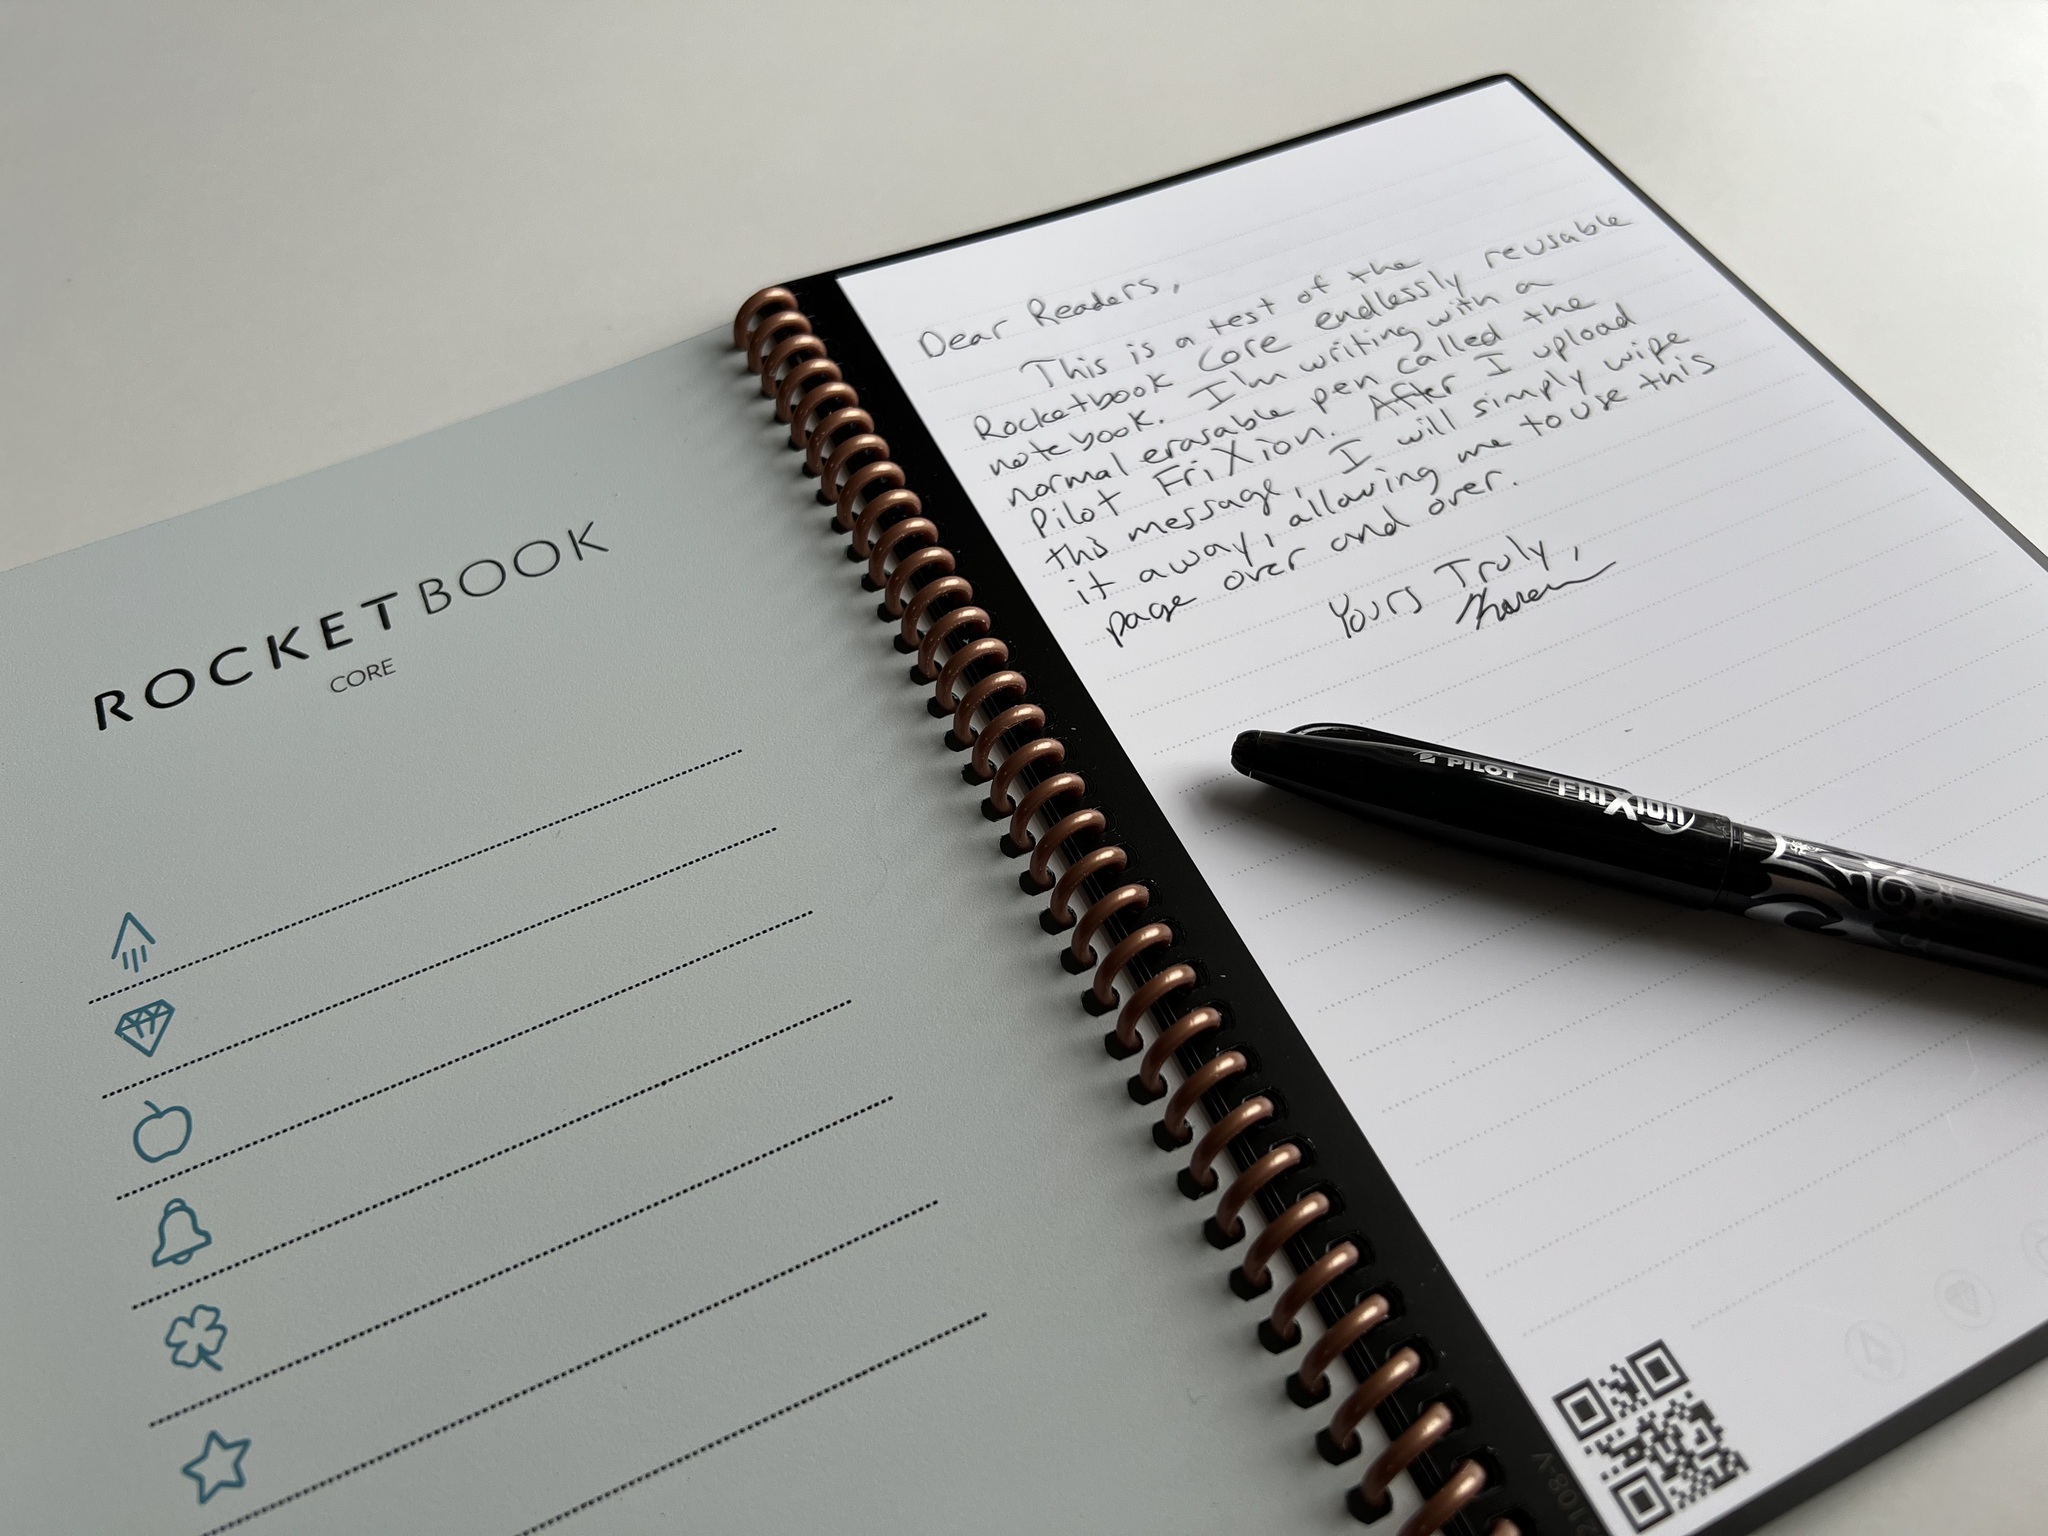 Rocketbook Core Smart Notebook Lifestyle Open Test Note